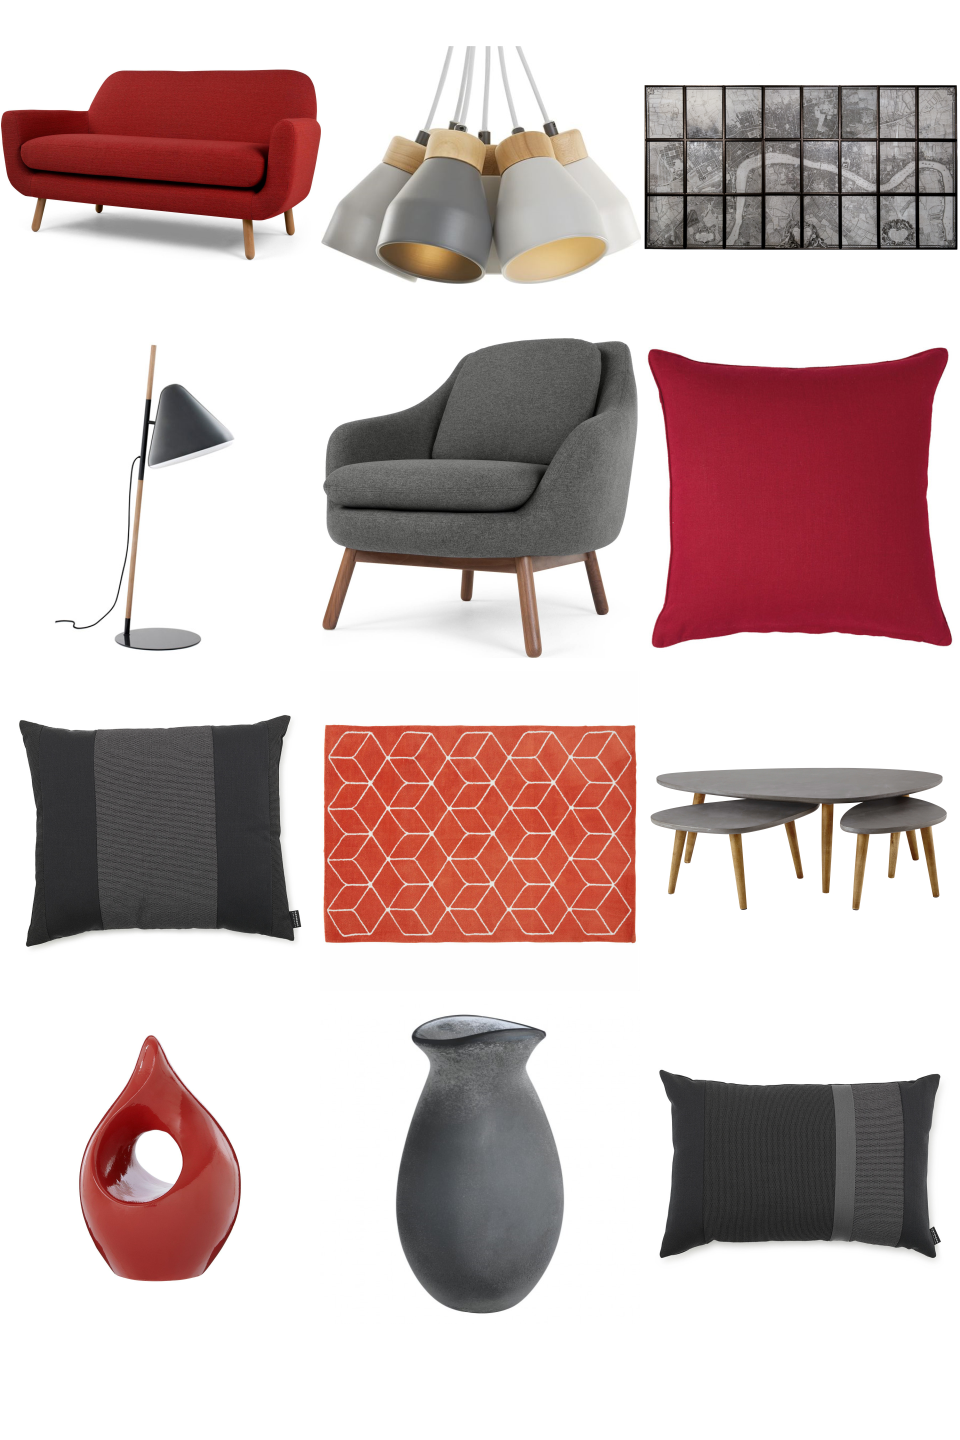 Red and Grey Living Room - Furnishful's Living Room Ideas - Inspiration Boards | Furnishful -   14 home accessories Grey interior design ideas